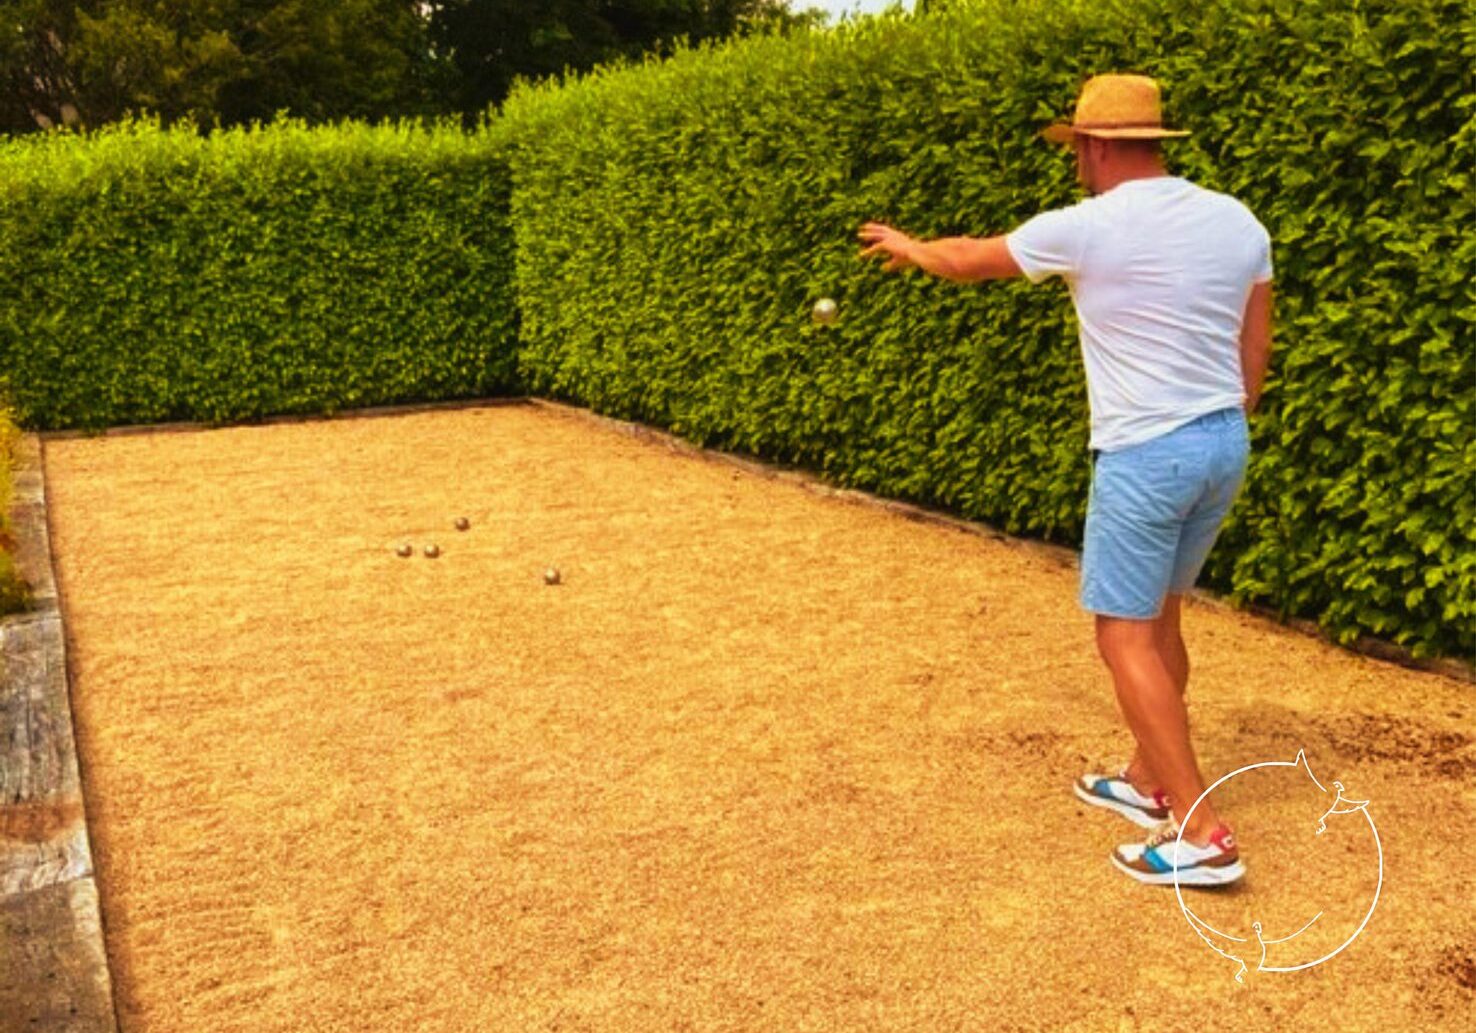 Dave is the owner of Kergudon and is playing petanque or Boules on the boules pitch surrounded by a beautiful green hedge